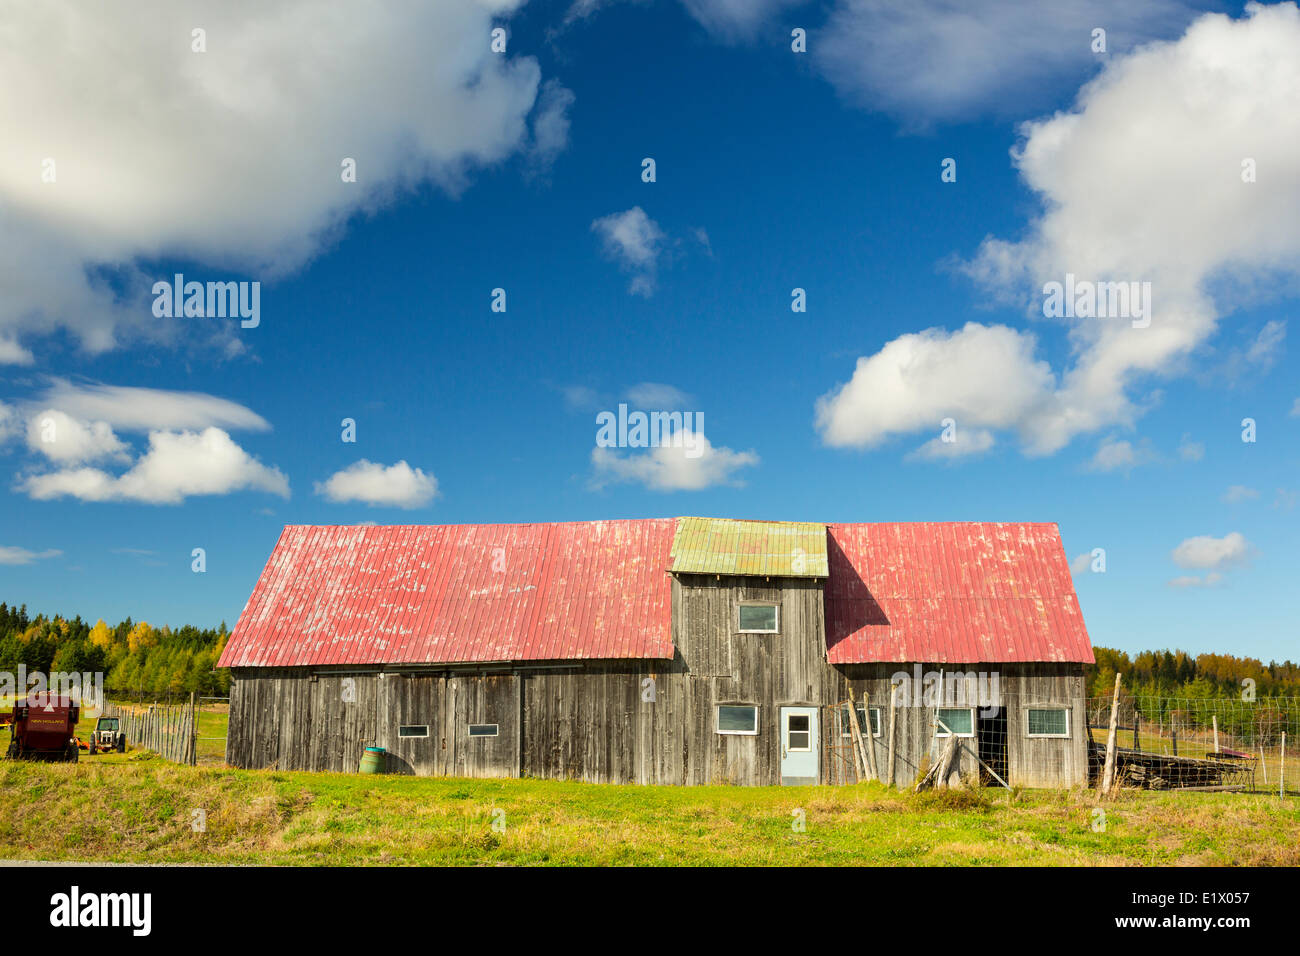 Old wooden barn, Saint-Jeanne-d'Arc, Quebec, Canada Stock Photo